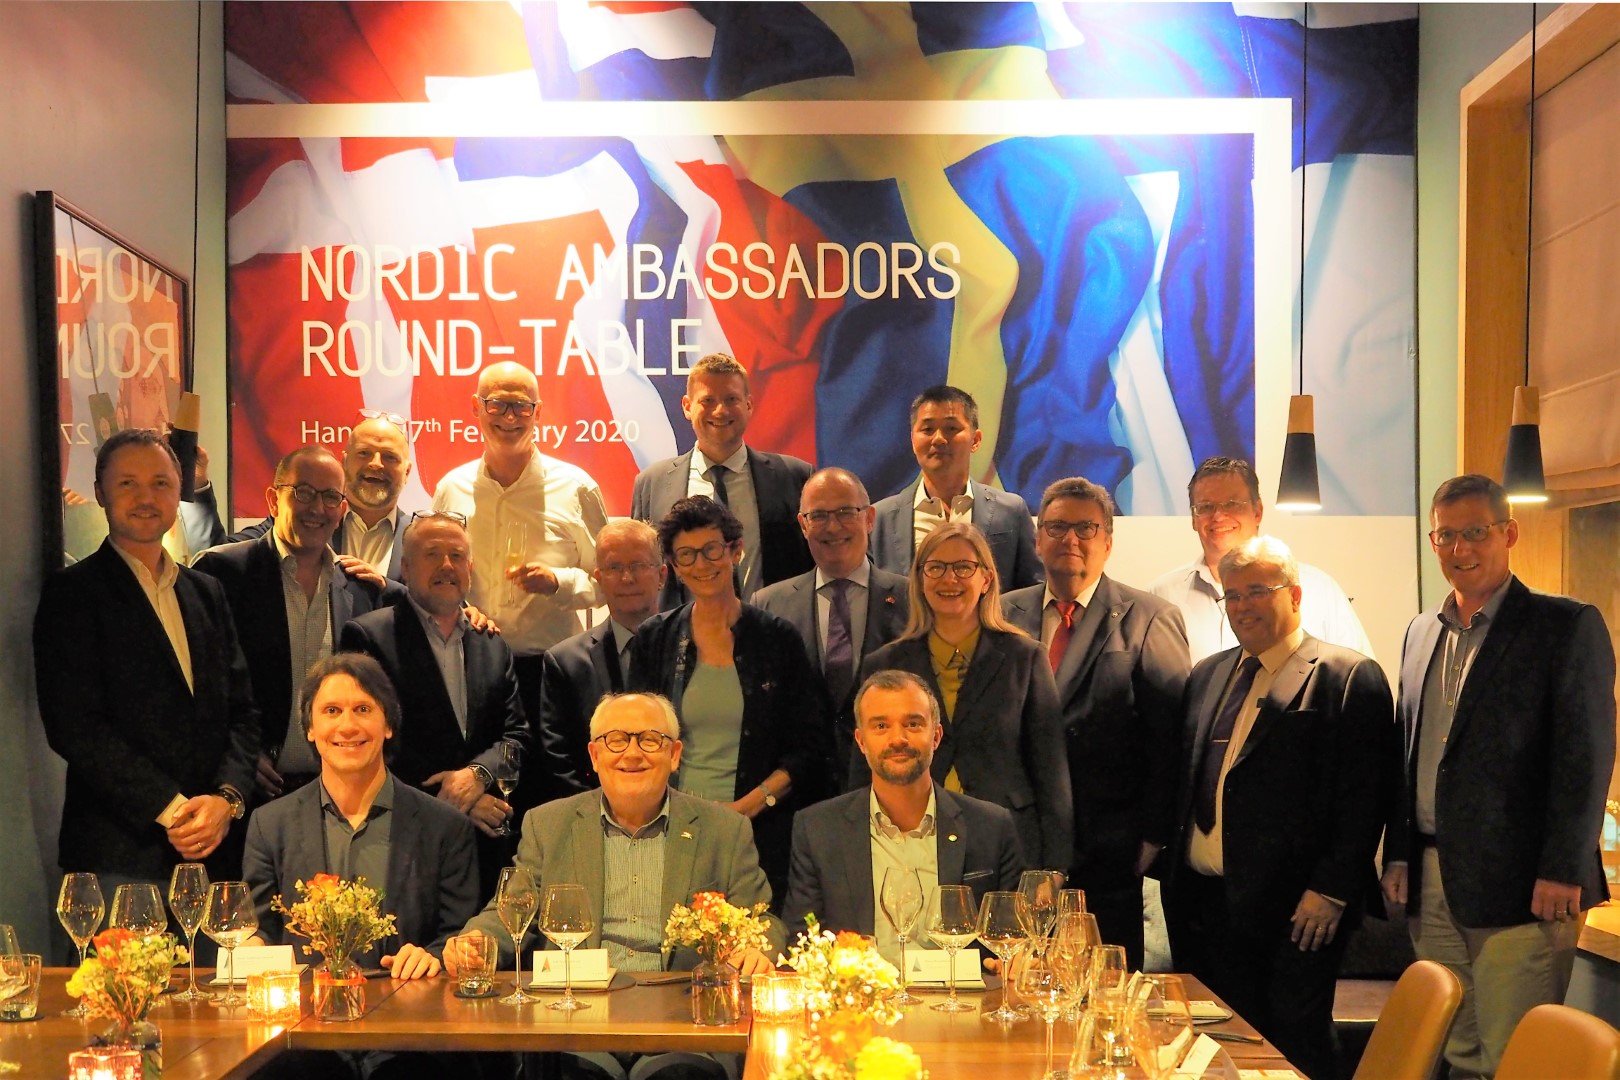 MEDIA RELEASE: ROUND-TABLE WITH NORDIC AMBASSADORS